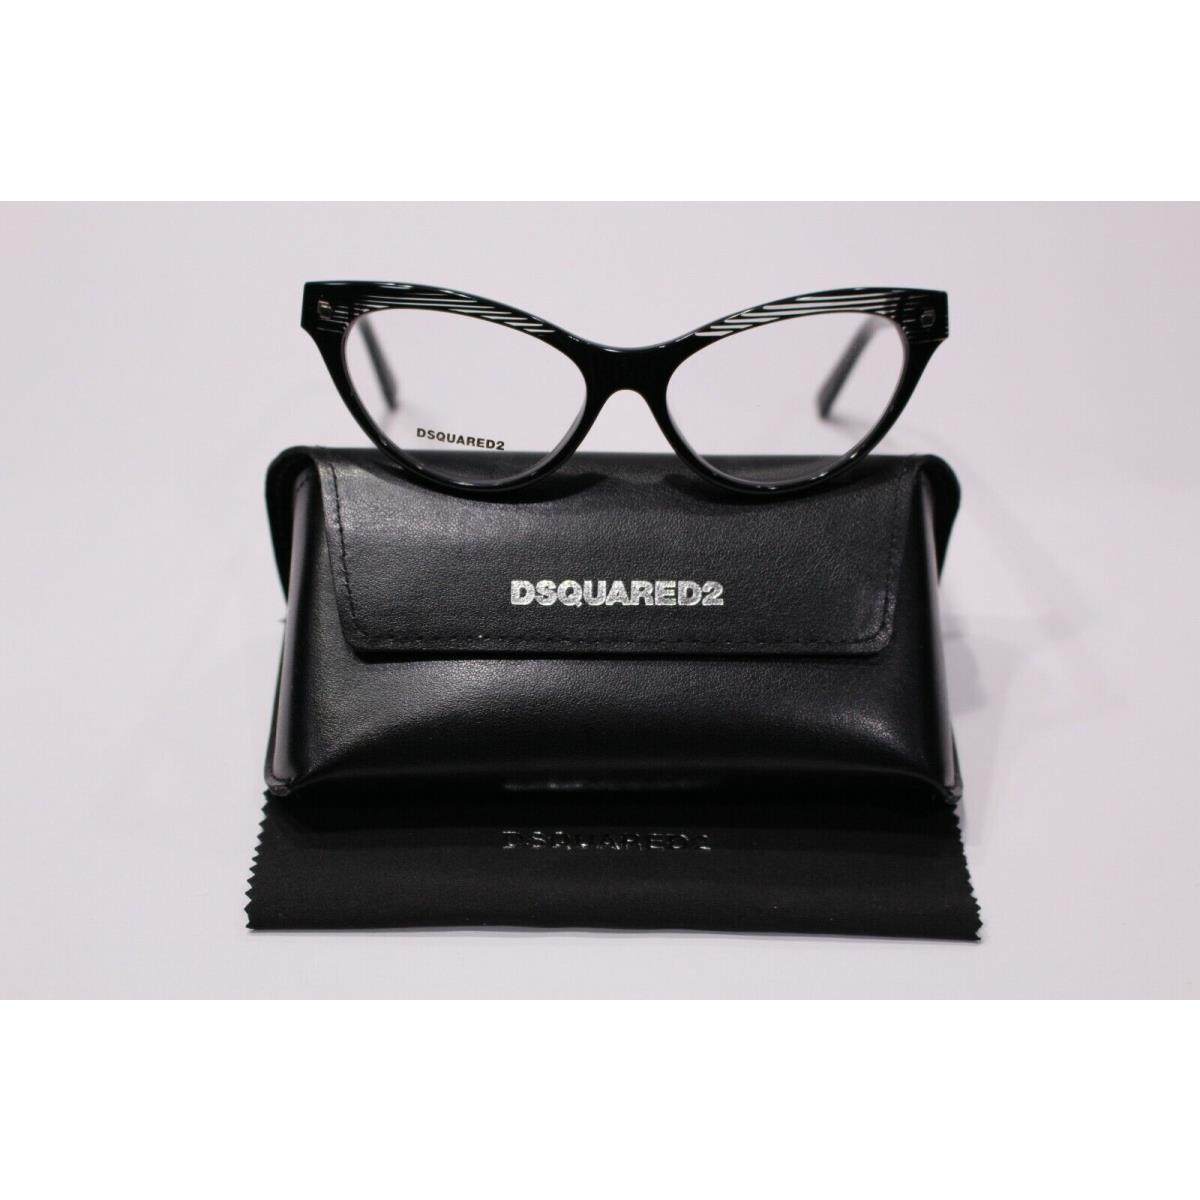 Dsquared2 Eyeglasses DQ5159 056 Havana-black with Clear Stripes 54mm